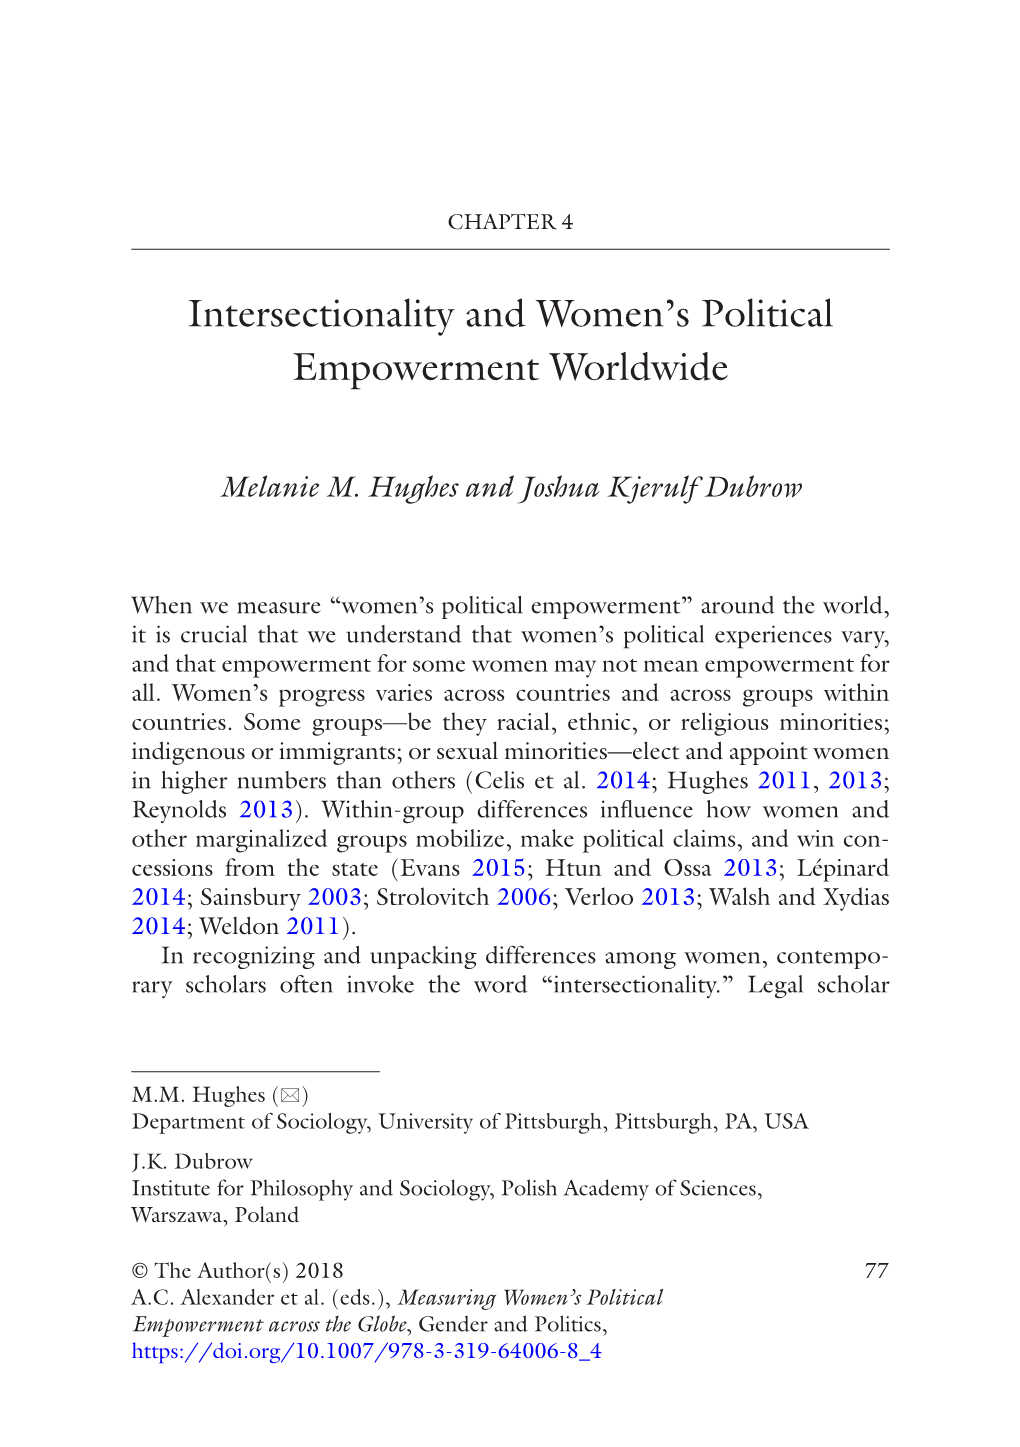 Intersectionality and Women's Political Empowerment Worldwide